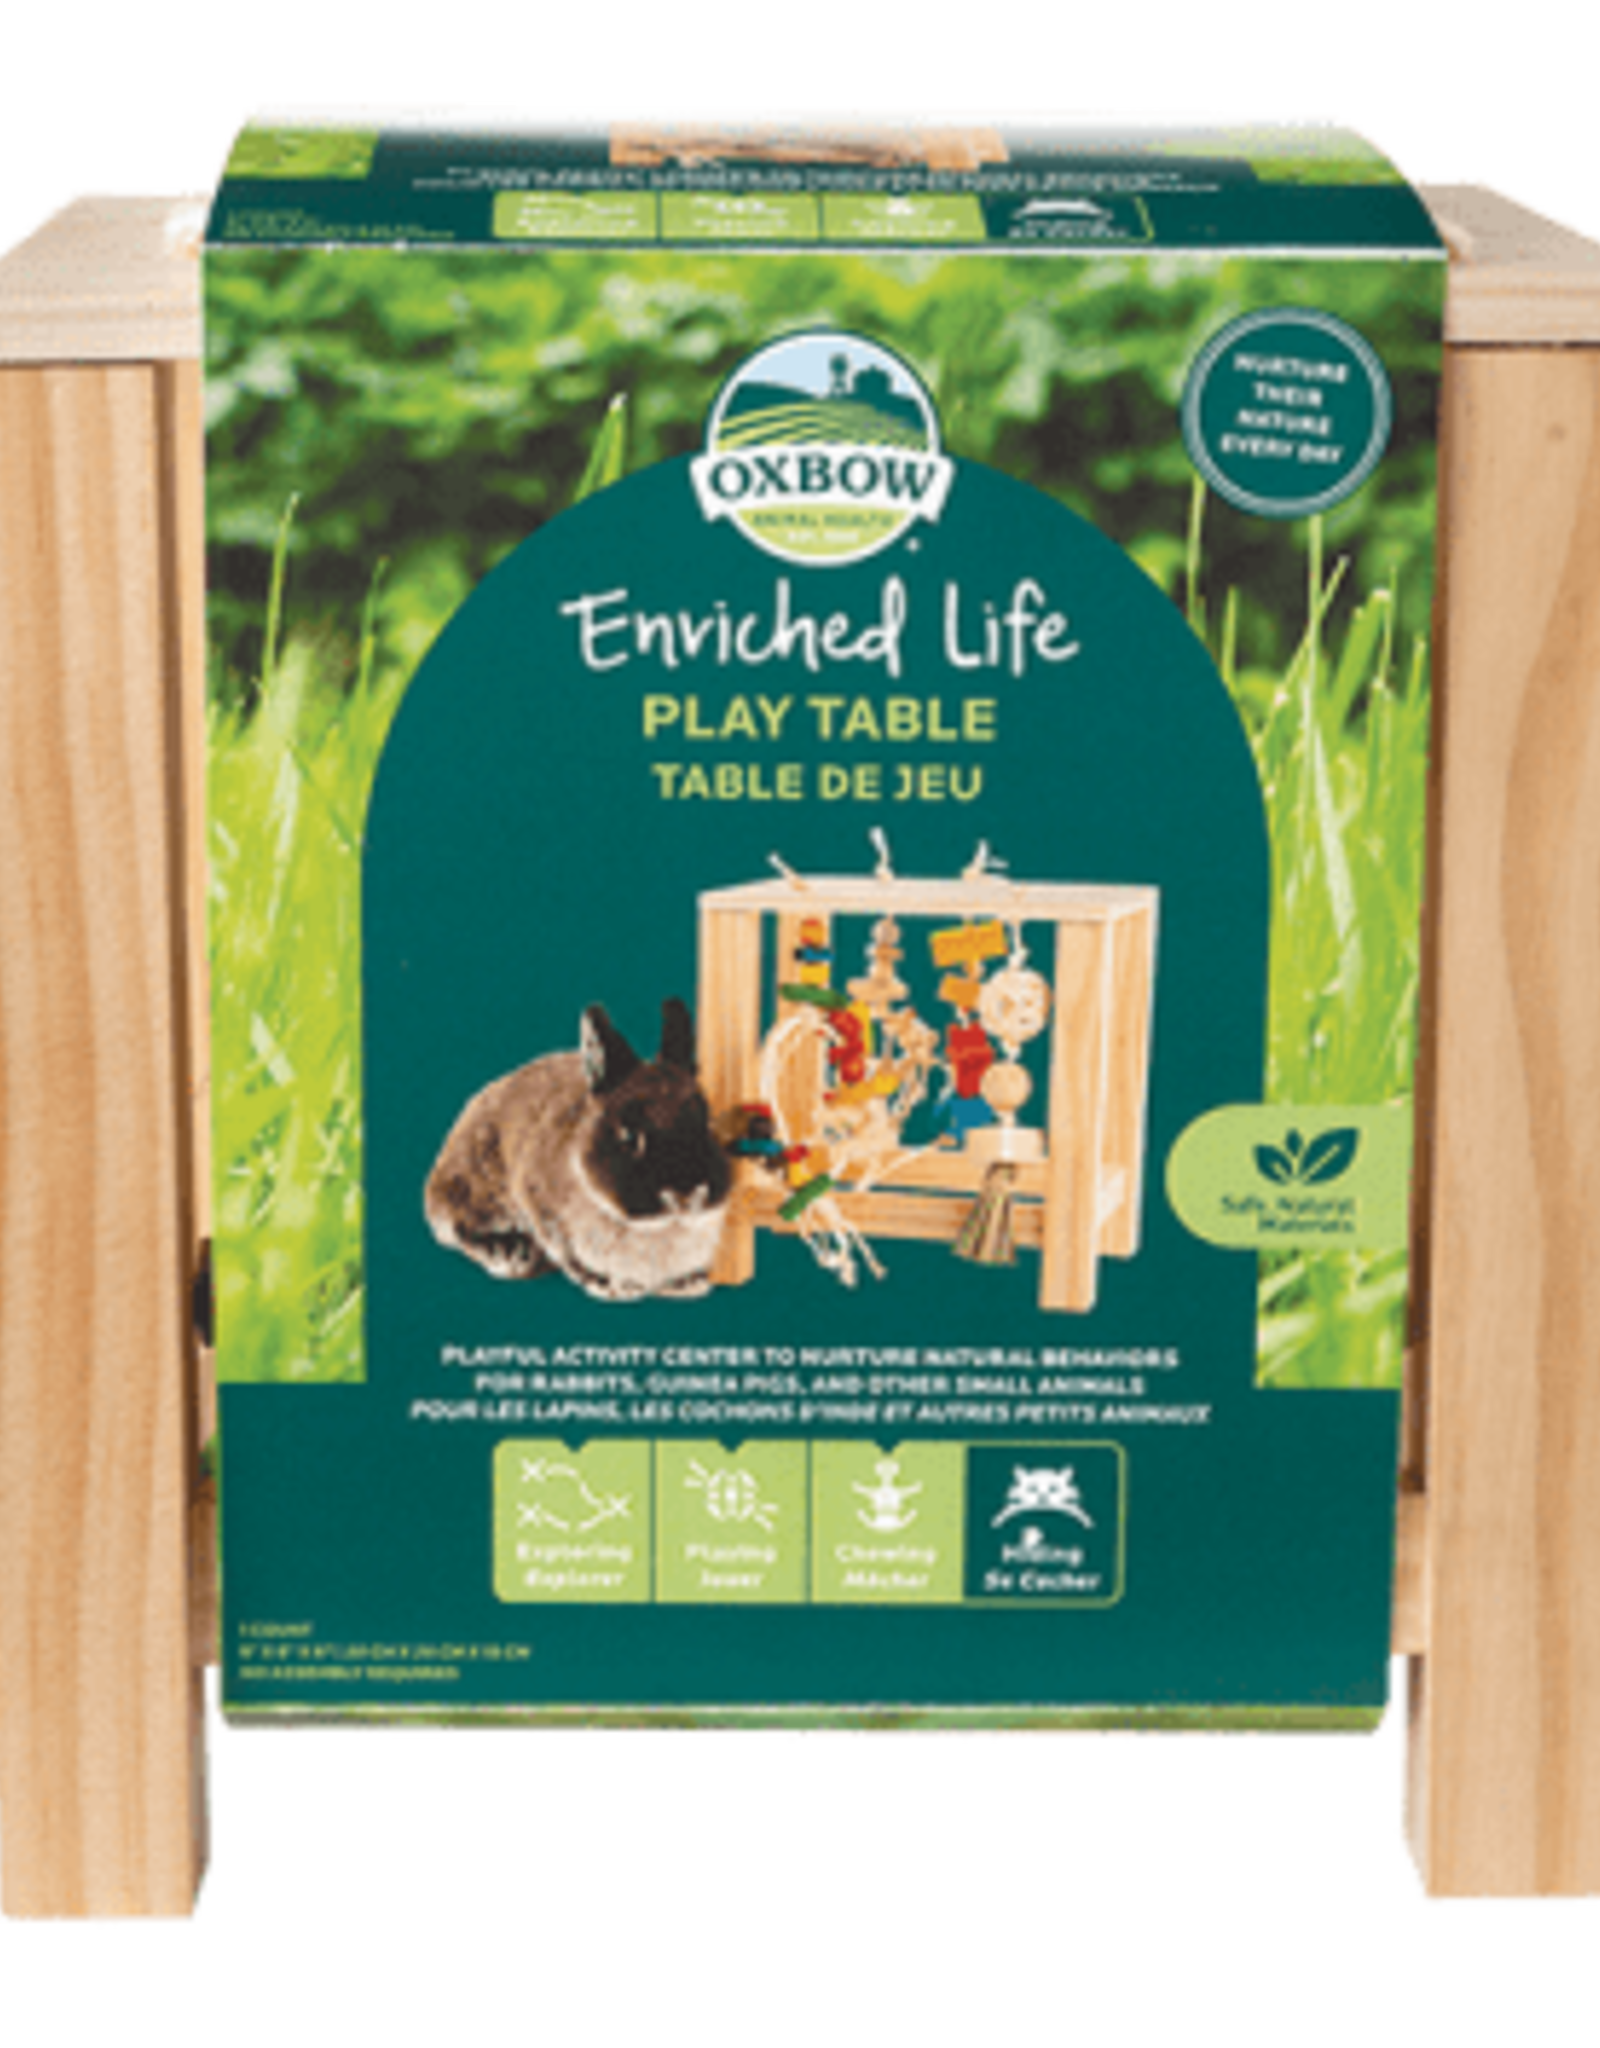 OXBOW PET PRODUCTS OXBOW PLAY TABLE